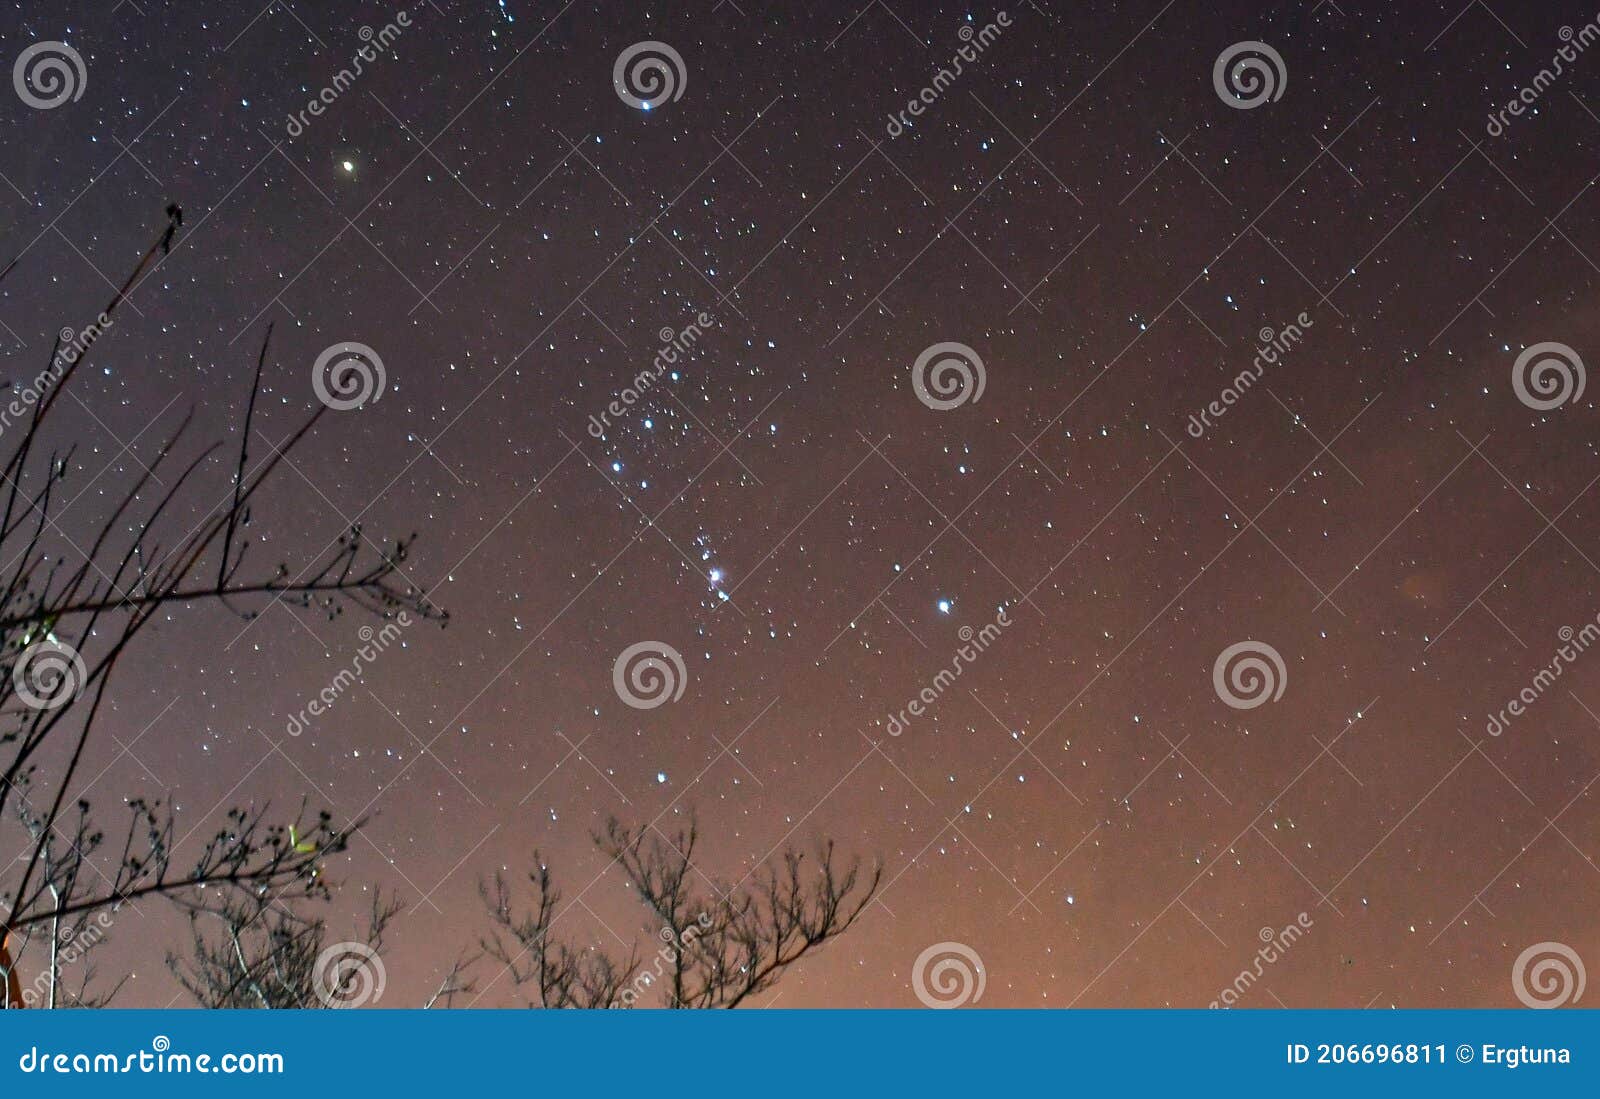 the constellation of orion